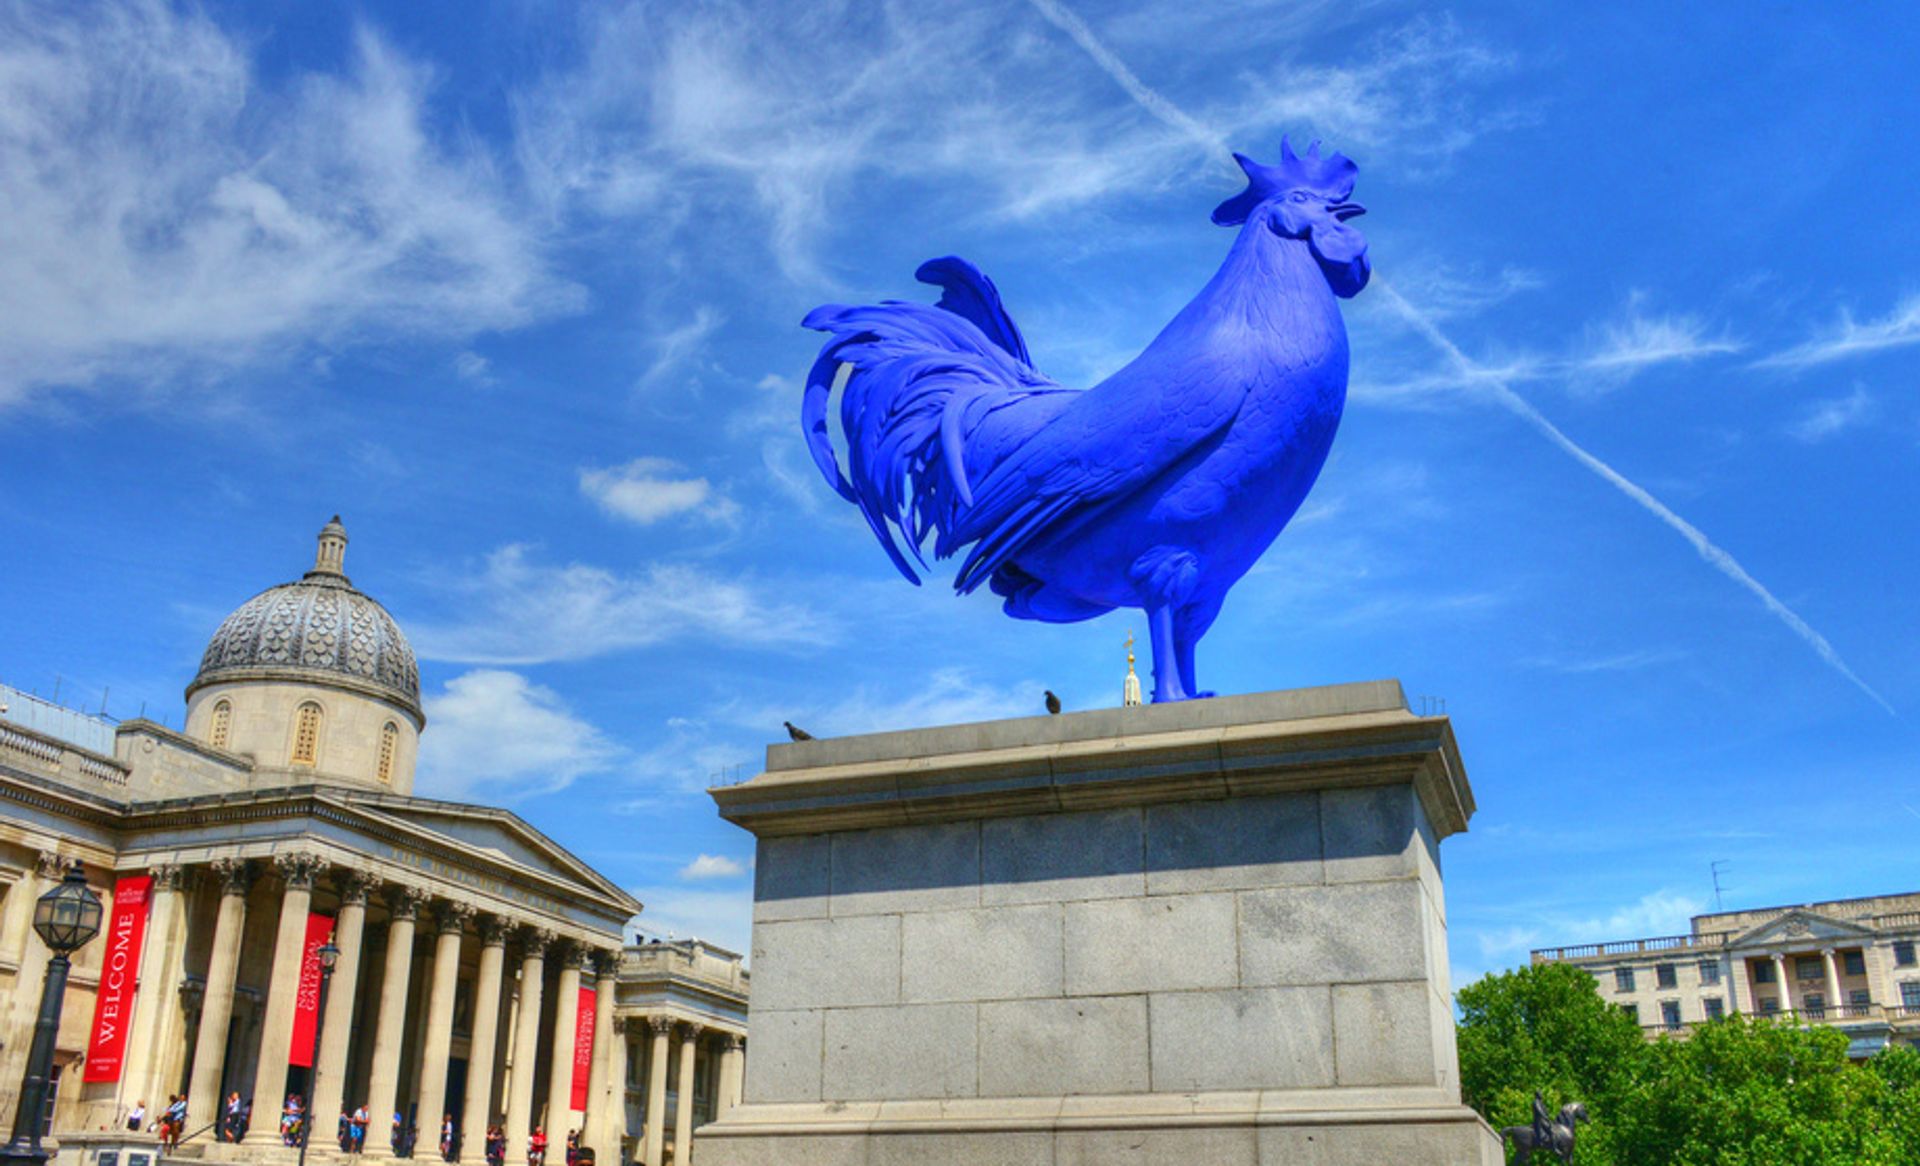 The Fourth Plinth commission in Trafalgar Square first began in 1999. Katharina Fritsch's Hahn/Cock was unveiled in 2013 Photo: Glyn Lowe PhotoWorks